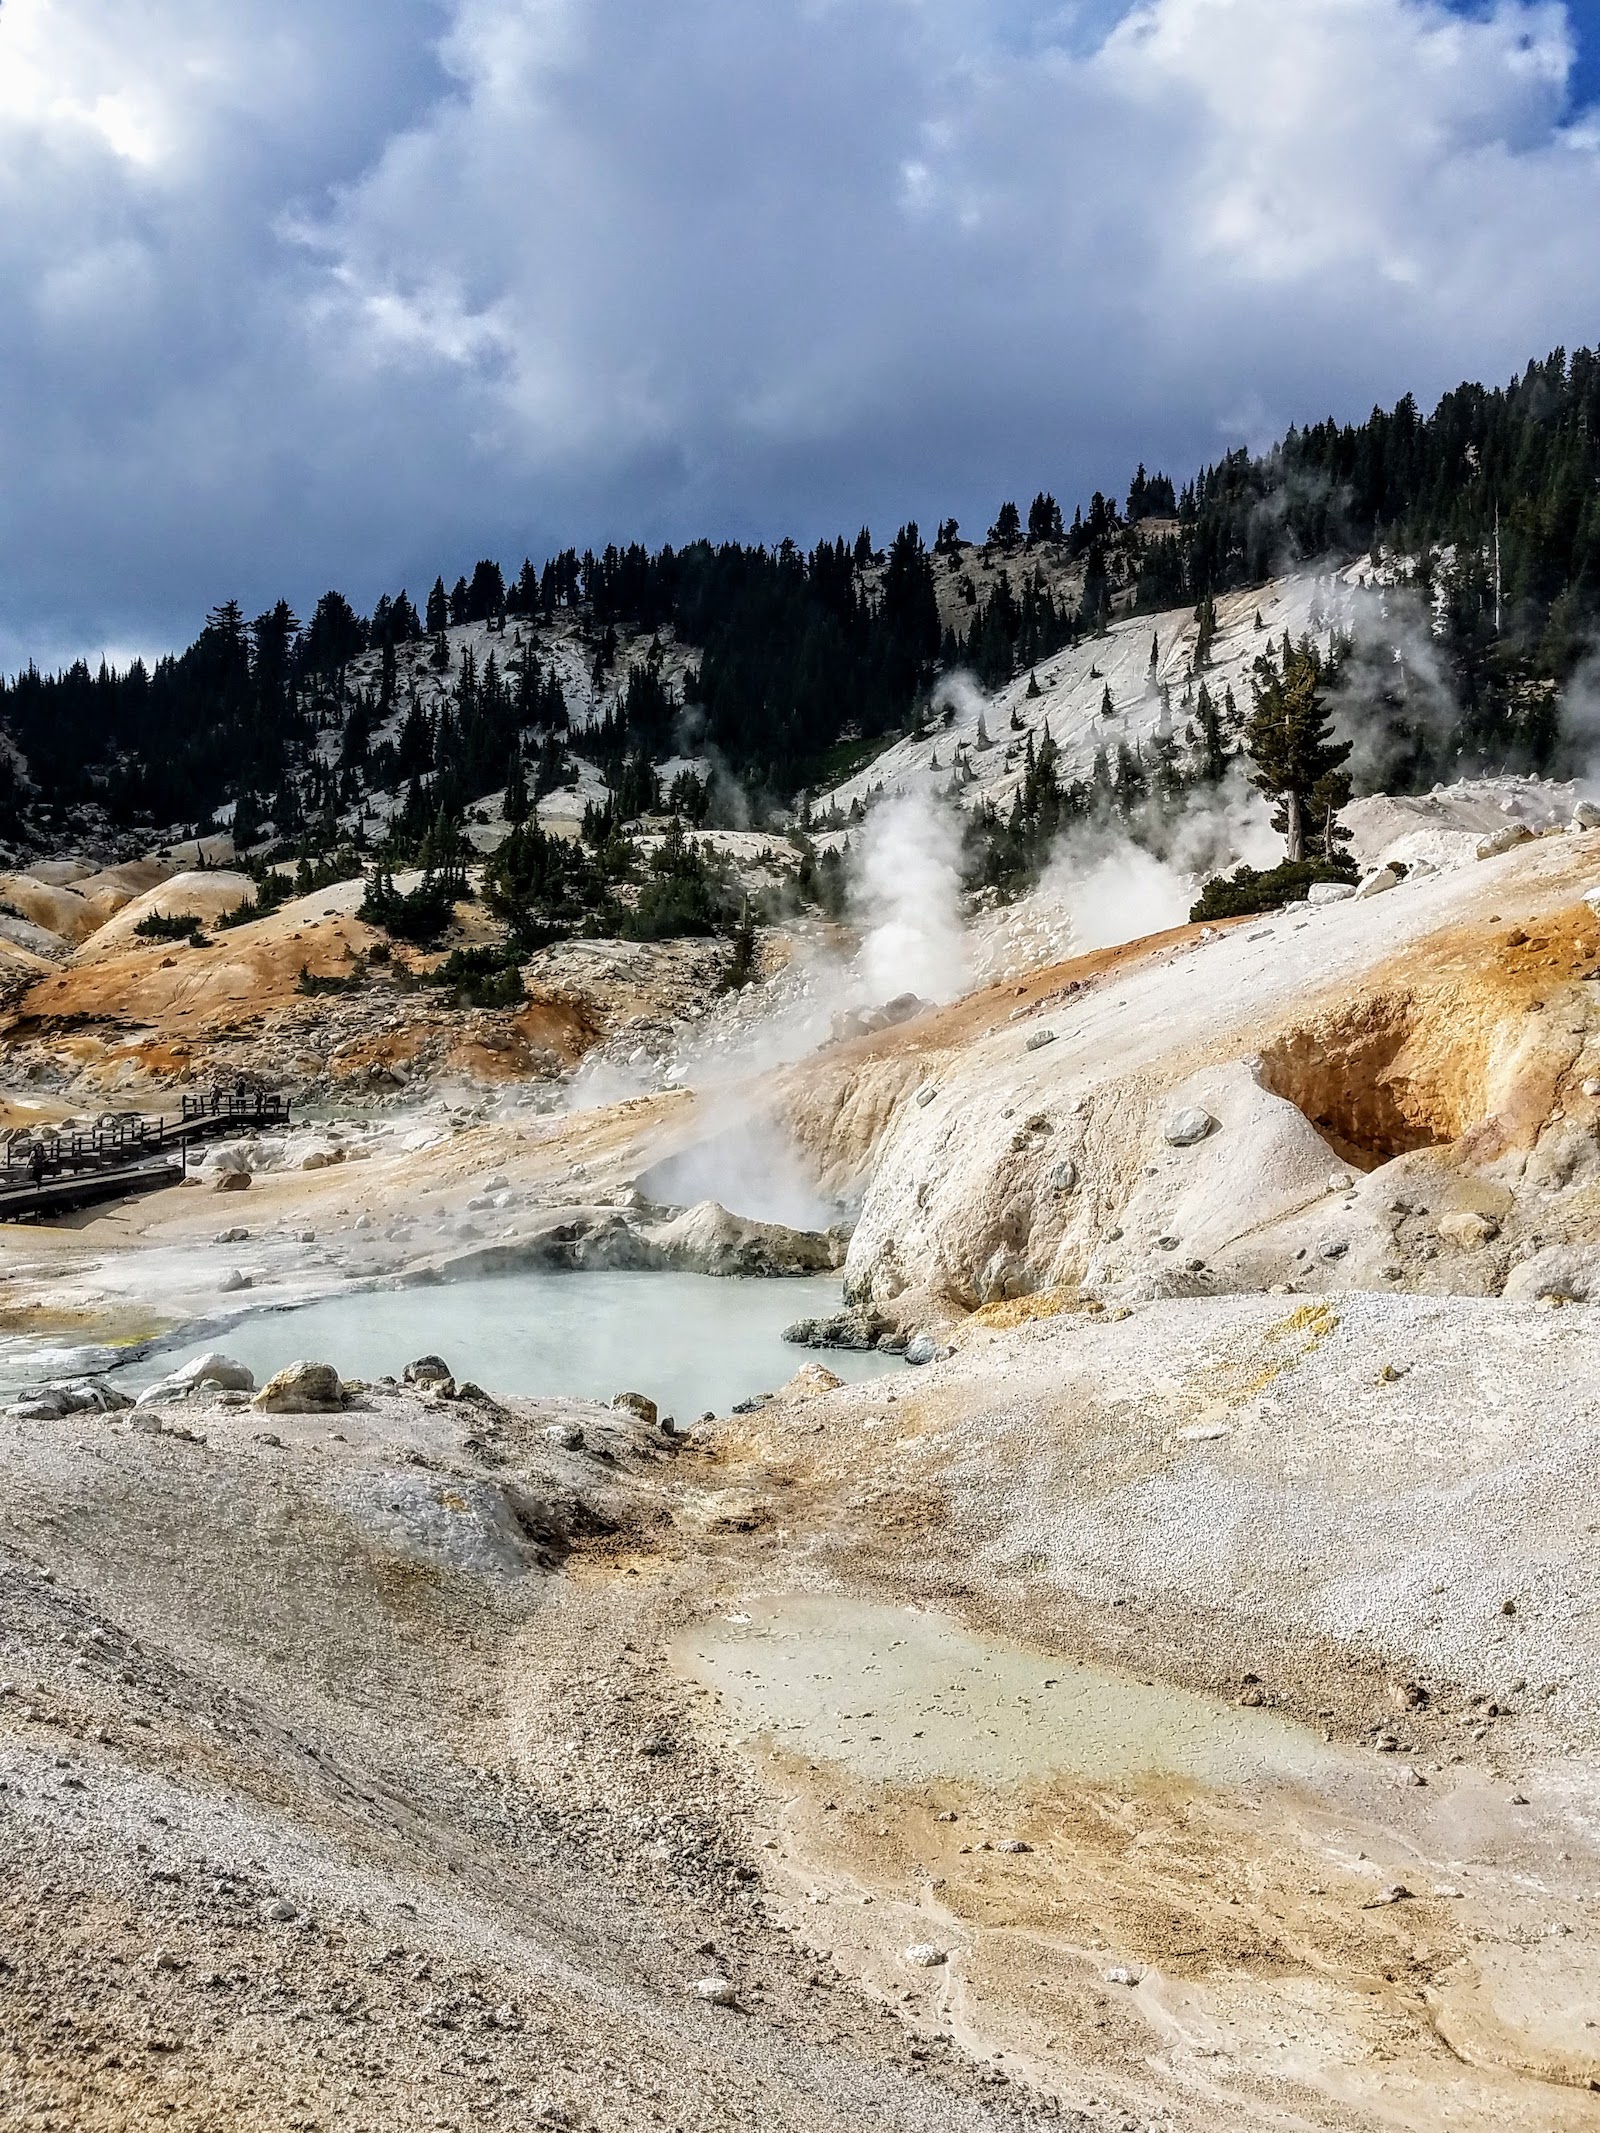 geothermal vents and pools in lassen volcanic national park